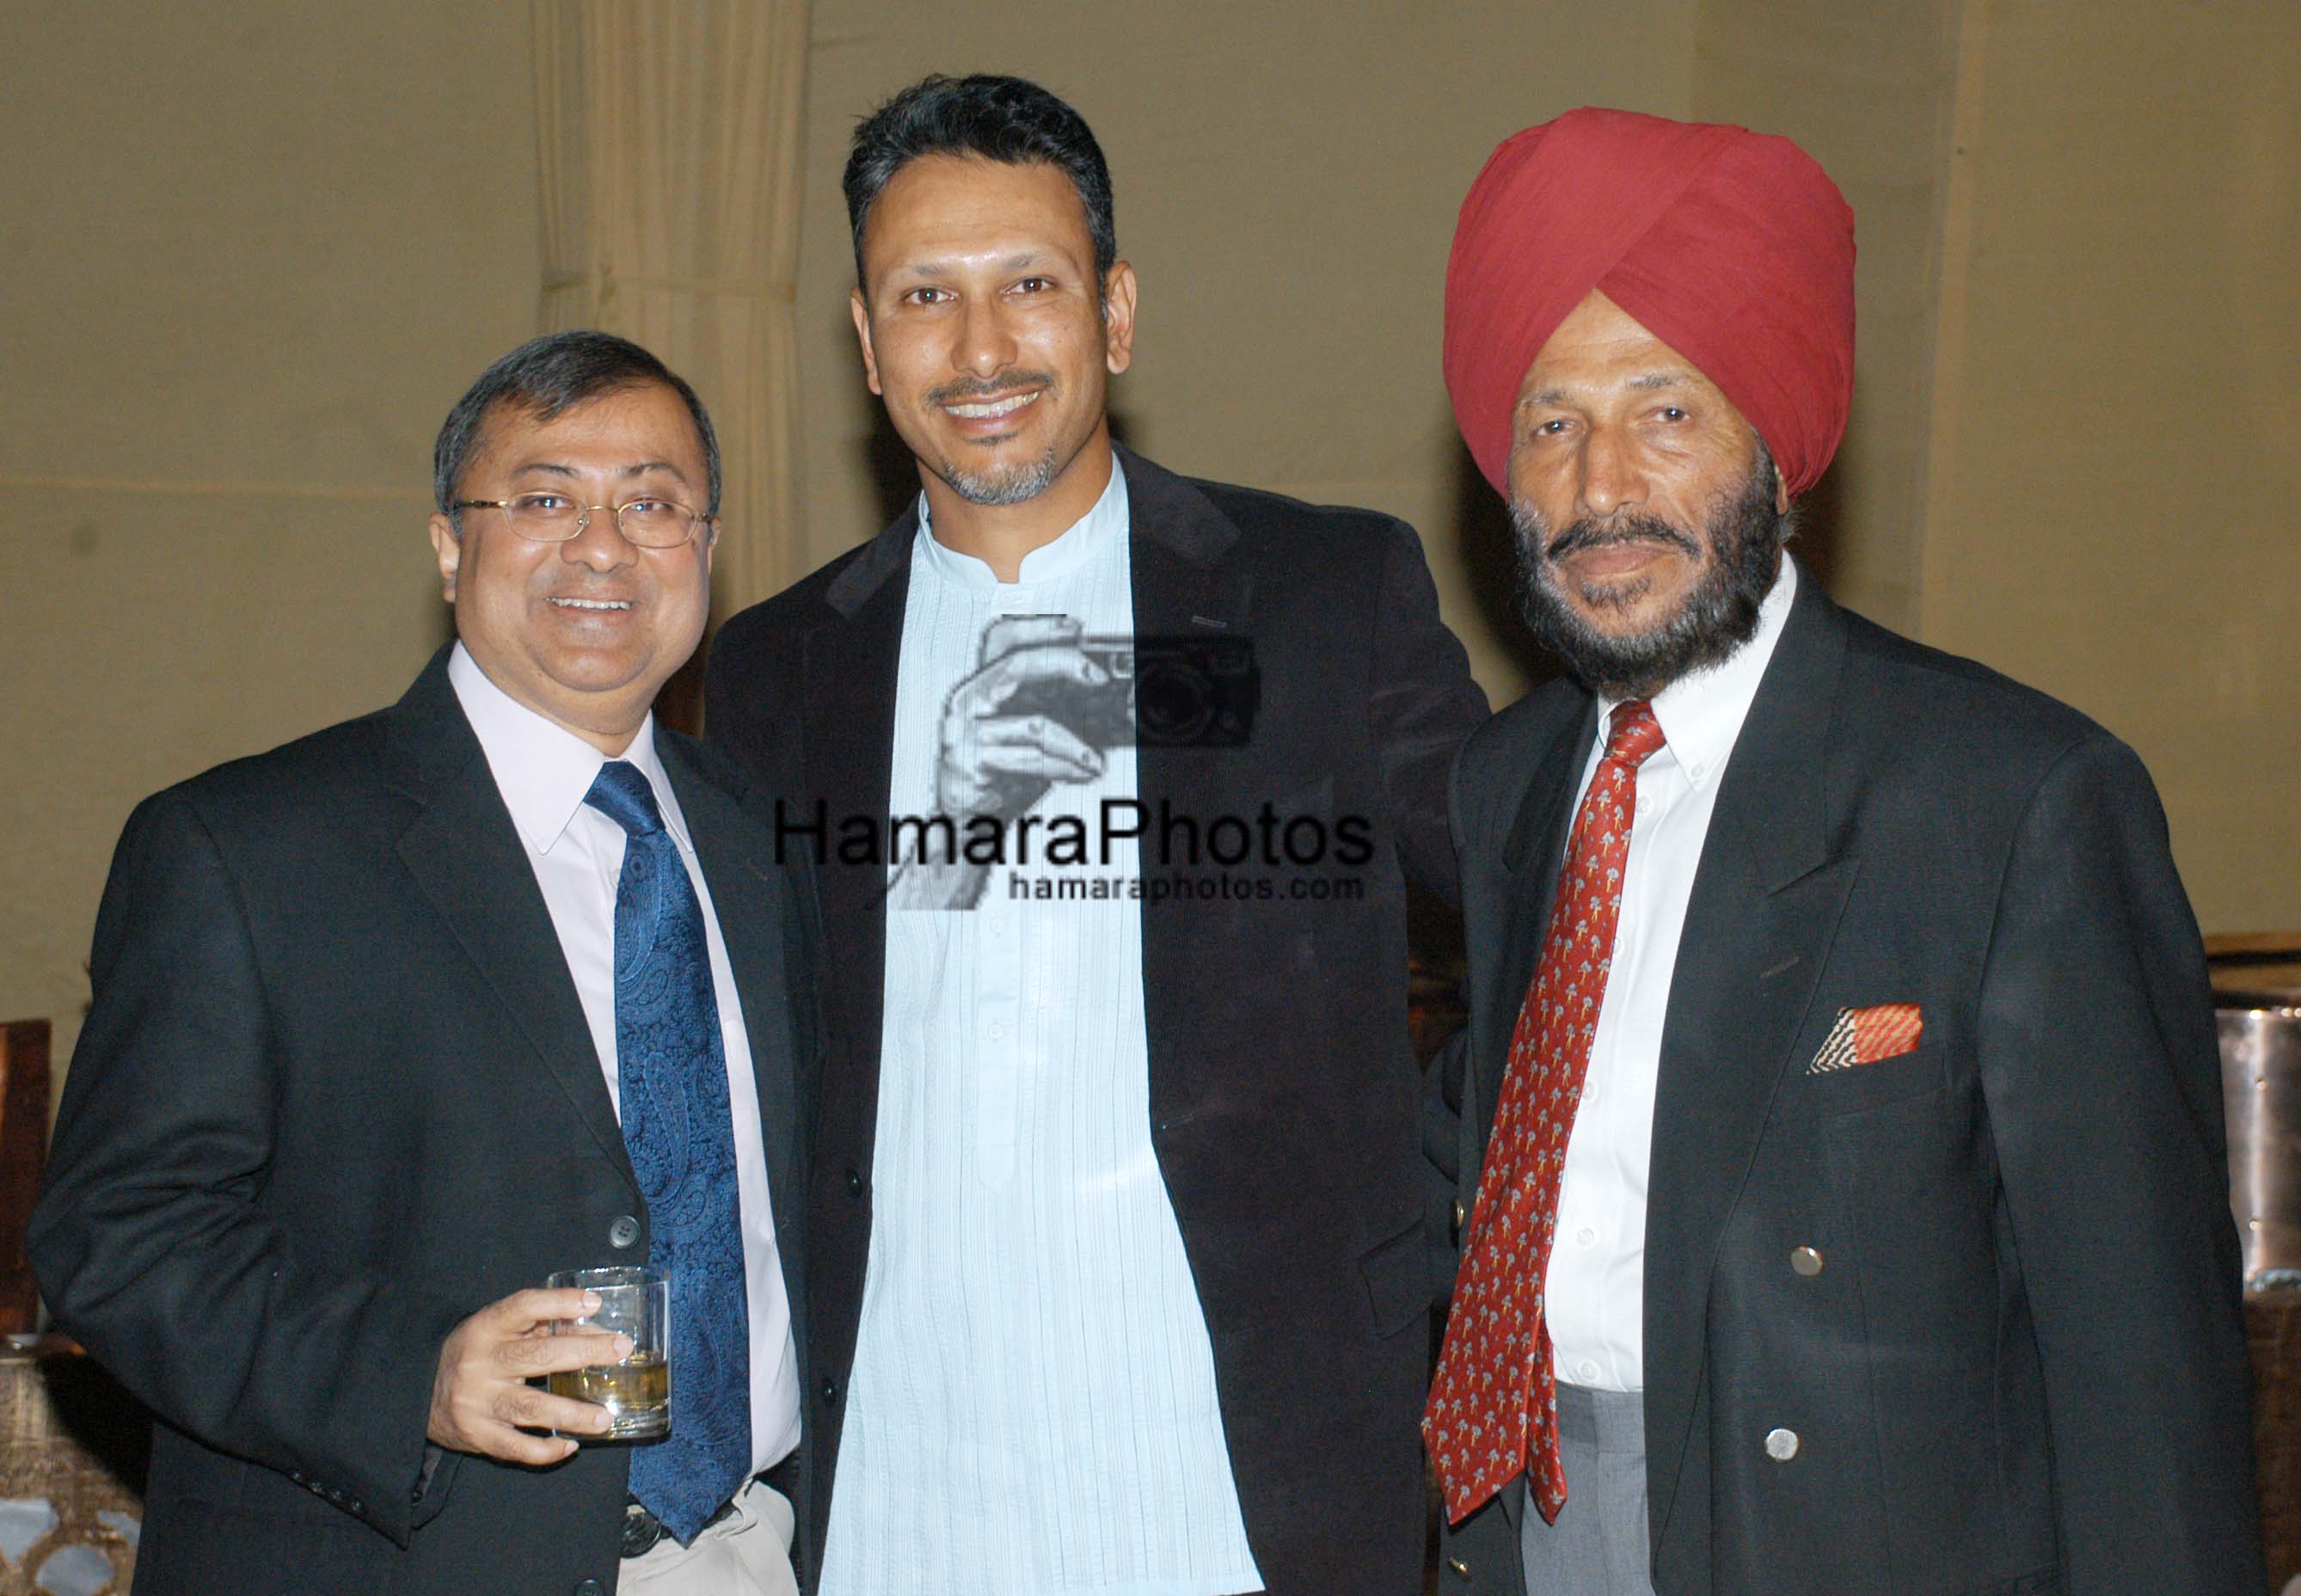 Asif Adil, Managing Directer, Diageo India with Jeev Milkha Singh & his father Mr. Milkha Singh at the Johnnie Walker Classic Welcome Dinner